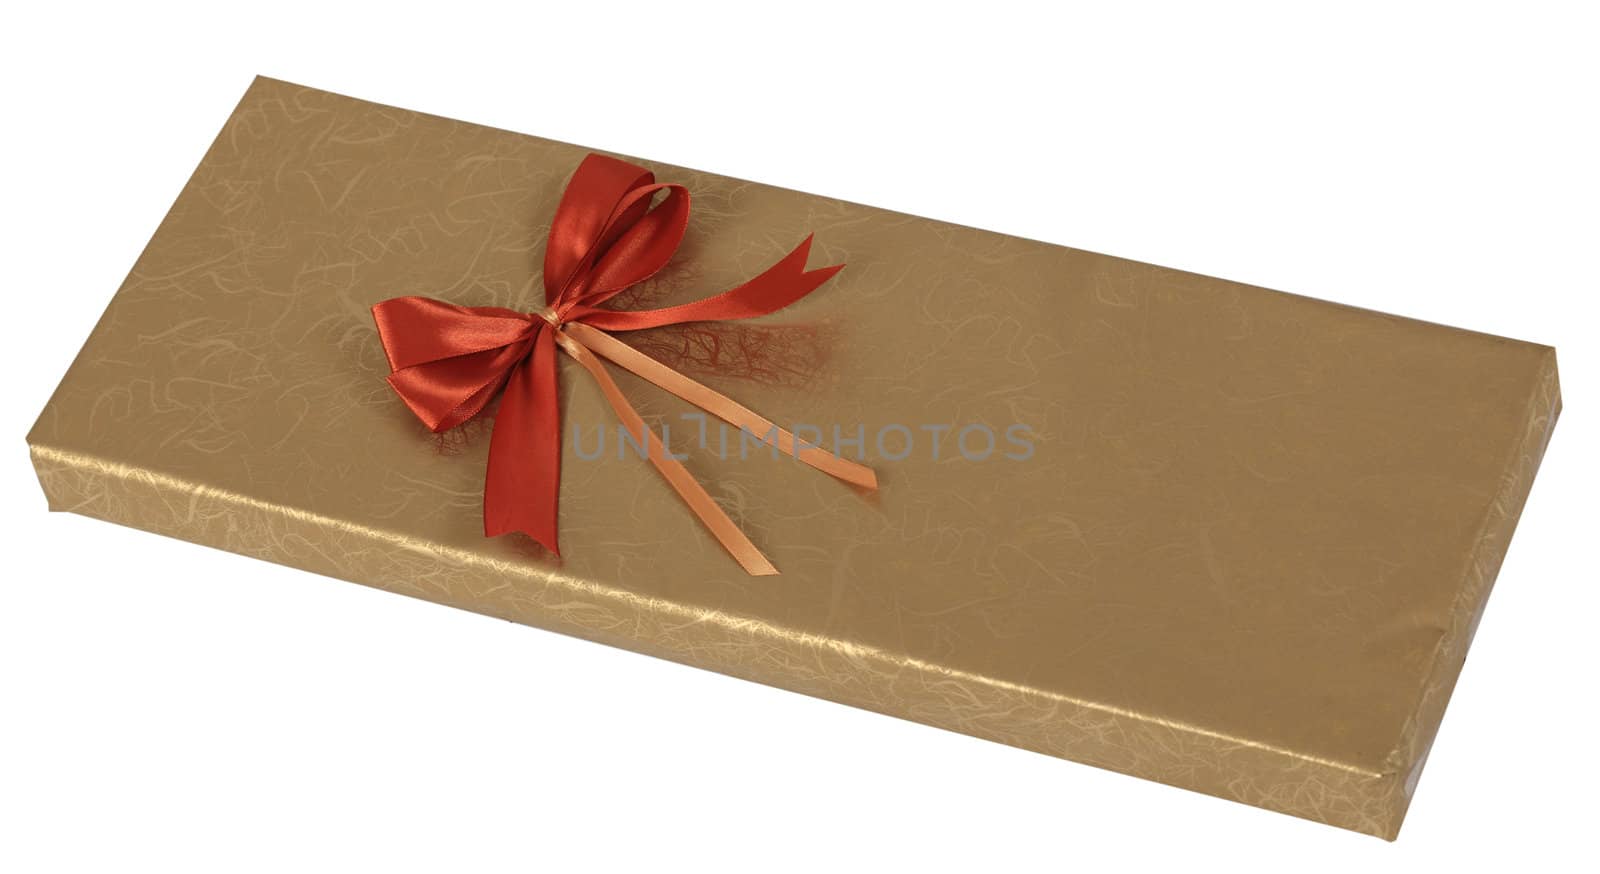 Gisft box isolated against a white background with clipping path included in the file.